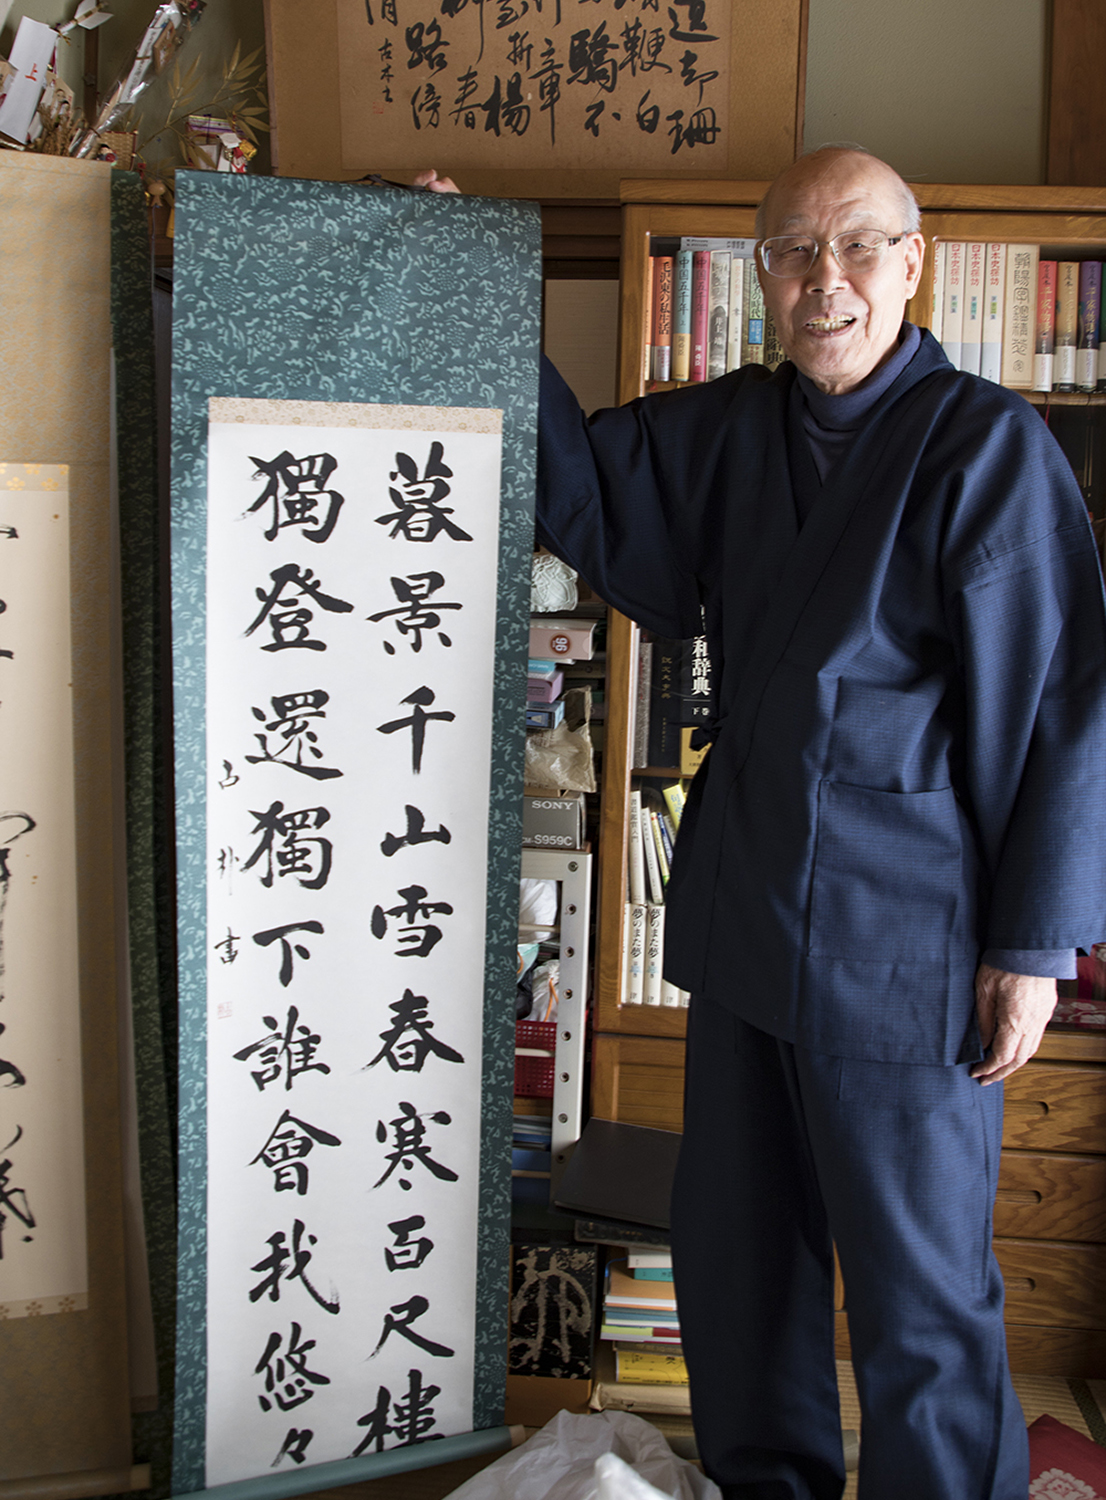 Portrait of Kazuo Hashimoto with his calligraphy in kaisho style